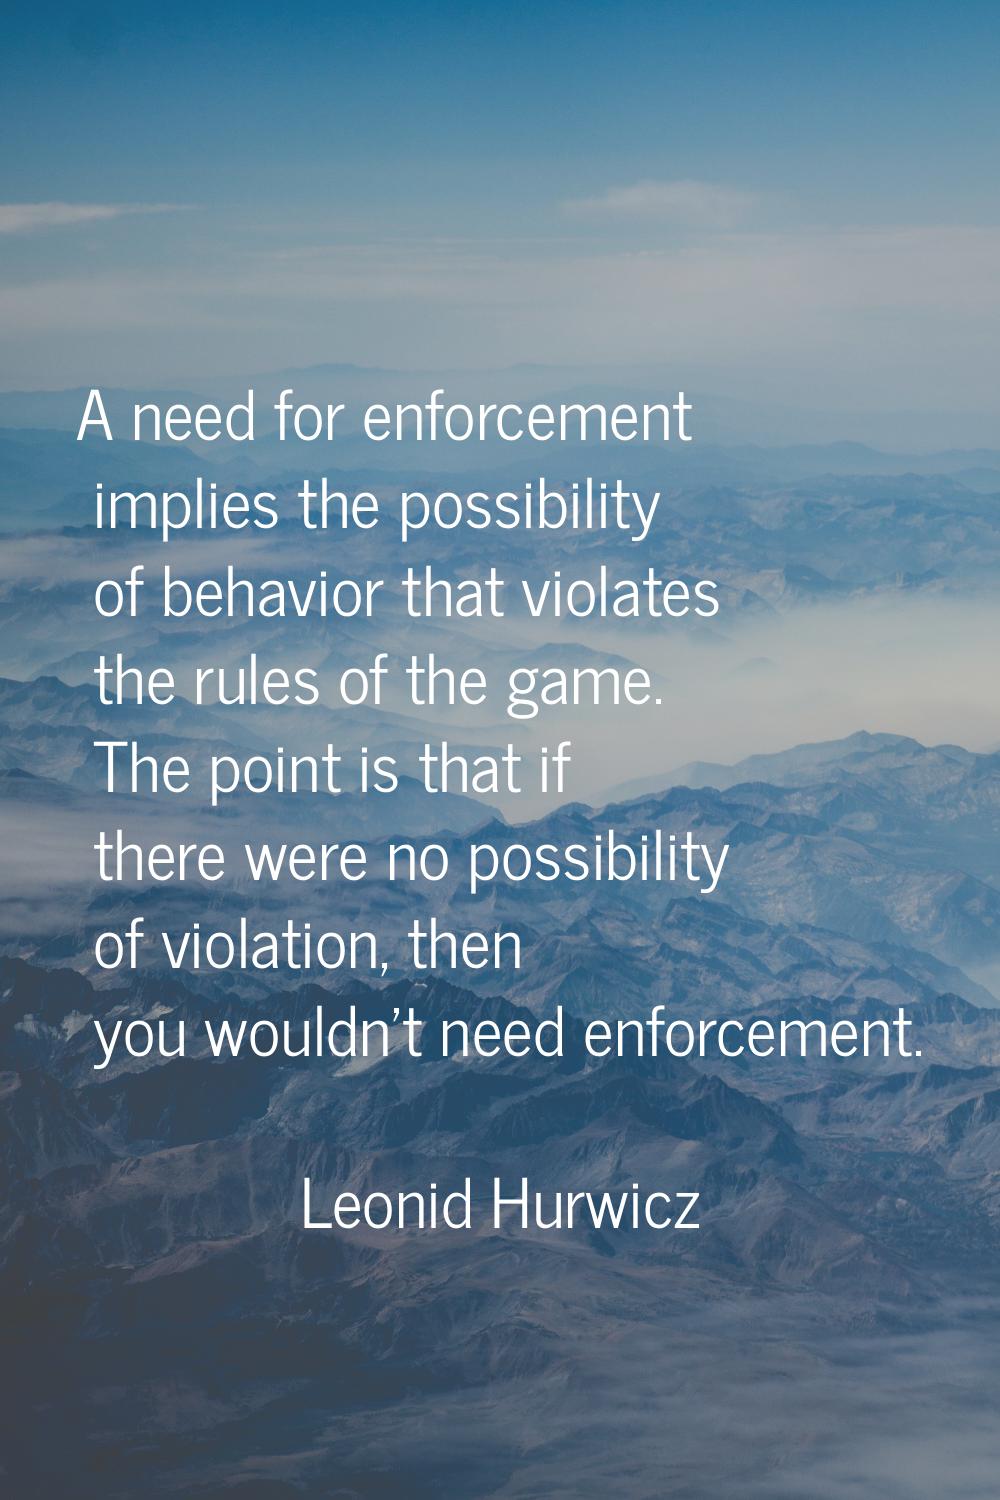 A need for enforcement implies the possibility of behavior that violates the rules of the game. The